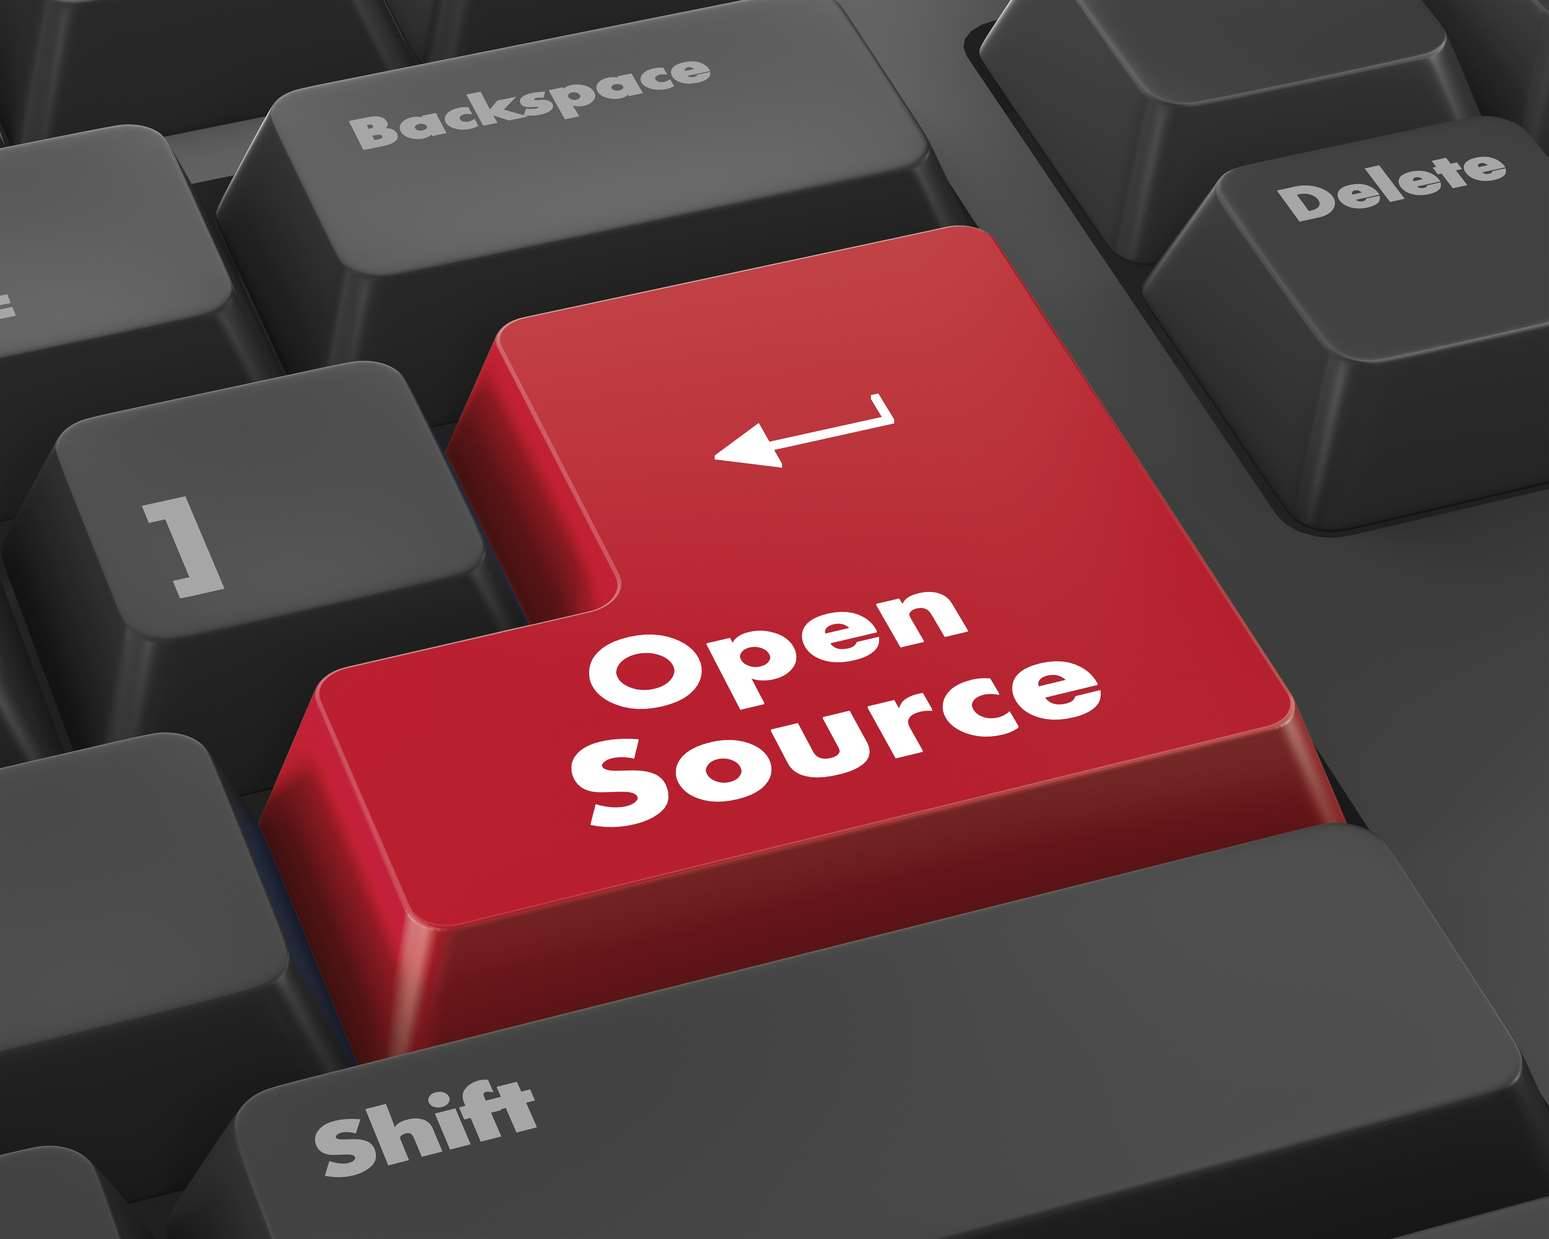 How To Set Up An All Open-source IT Infrastructure From Scratch